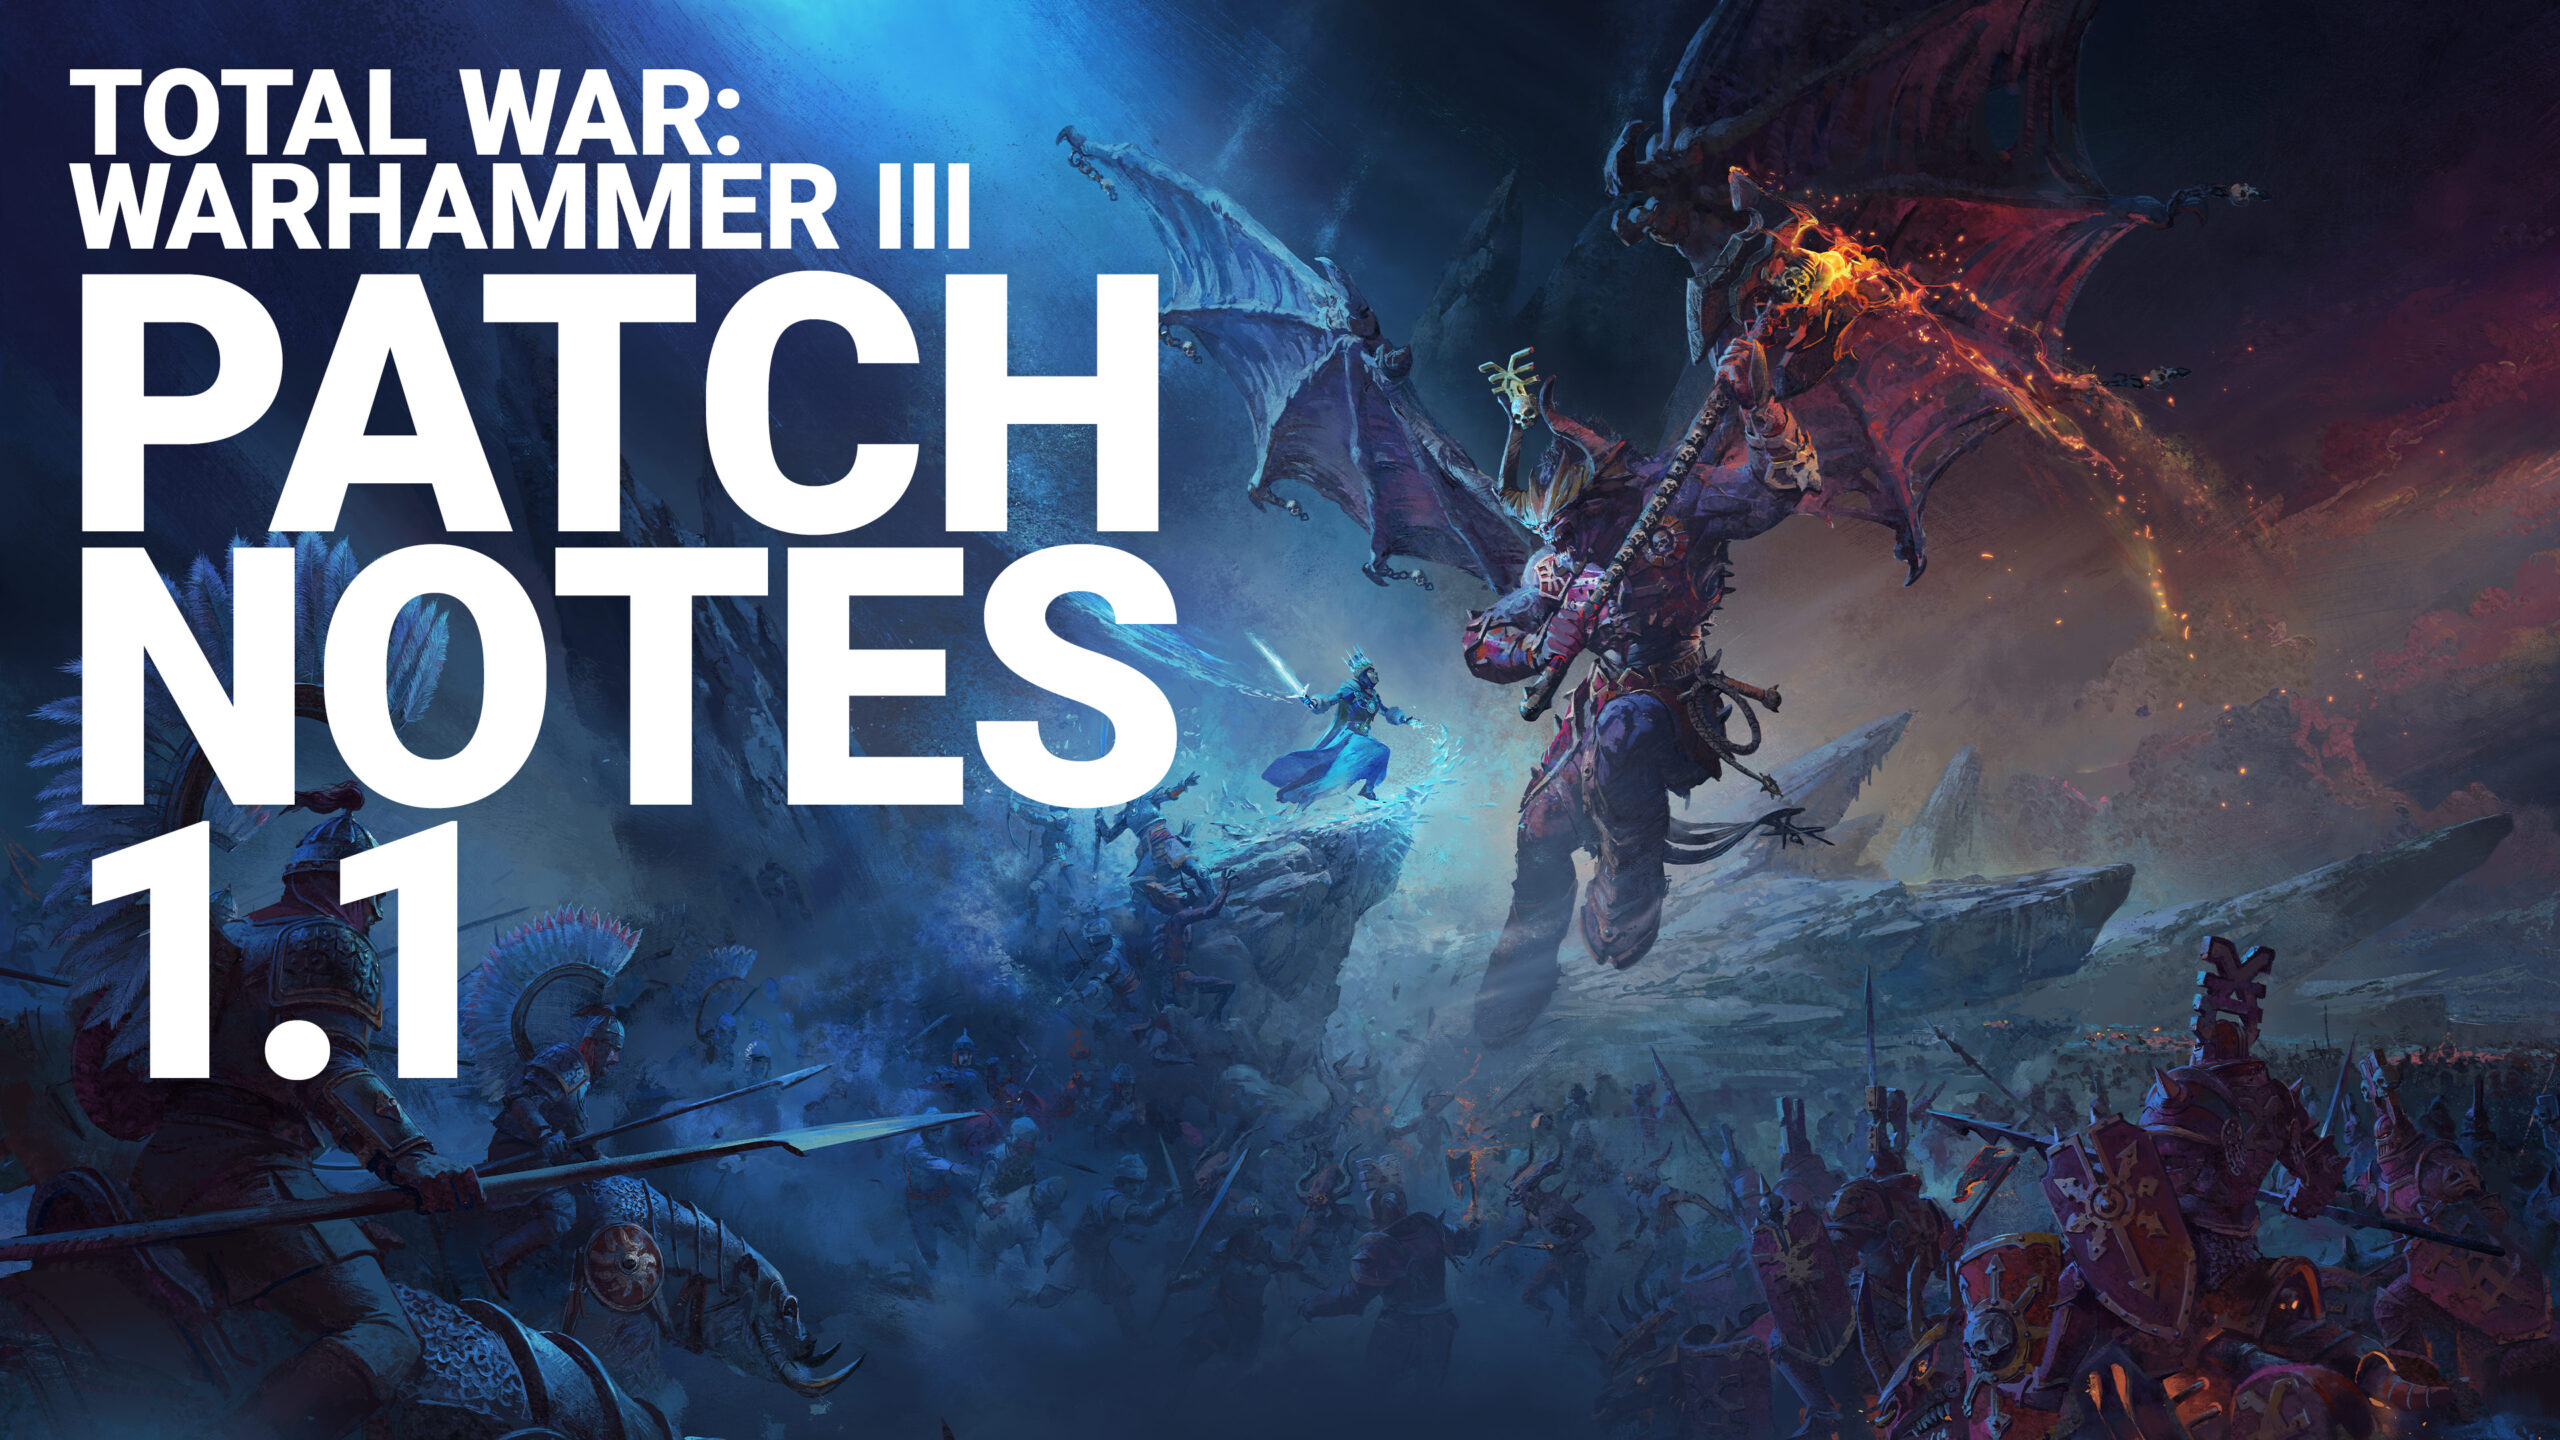 TOTAL WAR WARHAMMER 3 PATCH 1.1 RELEASE DATE - HERE'S WHEN THE FIRST MAJOR UPDATE LAUNCHES